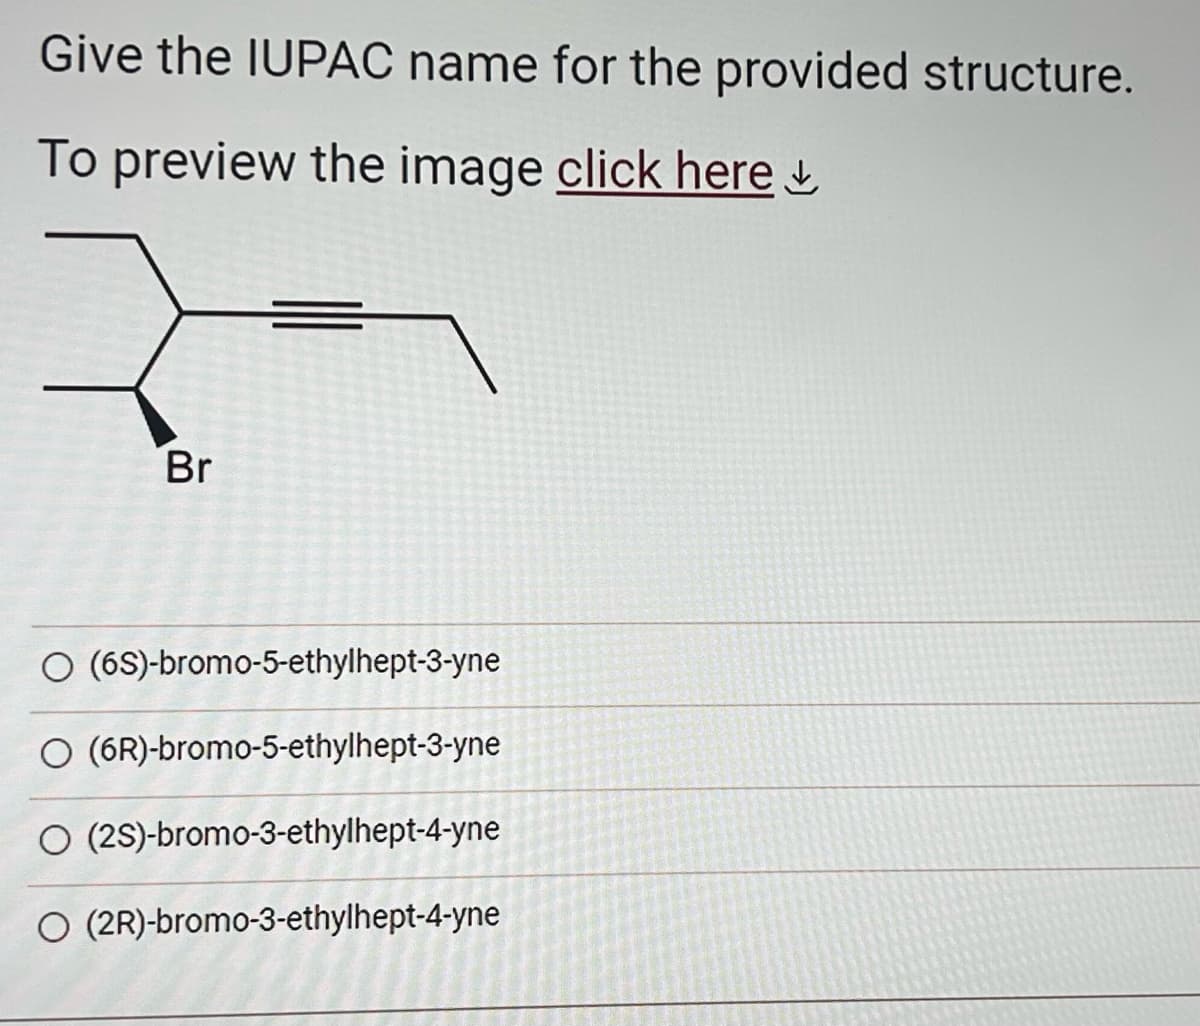 Give the IUPAC name for the provided structure.
To preview the image click here
Br
O (6S)-bromo-5-ethylhept-3-yne
O (6R)-bromo-5-ethylhept-3-yne
O (2S)-bromo-3-ethylhept-4-yne
O (2R)-bromo-3-ethylhept-4-yne